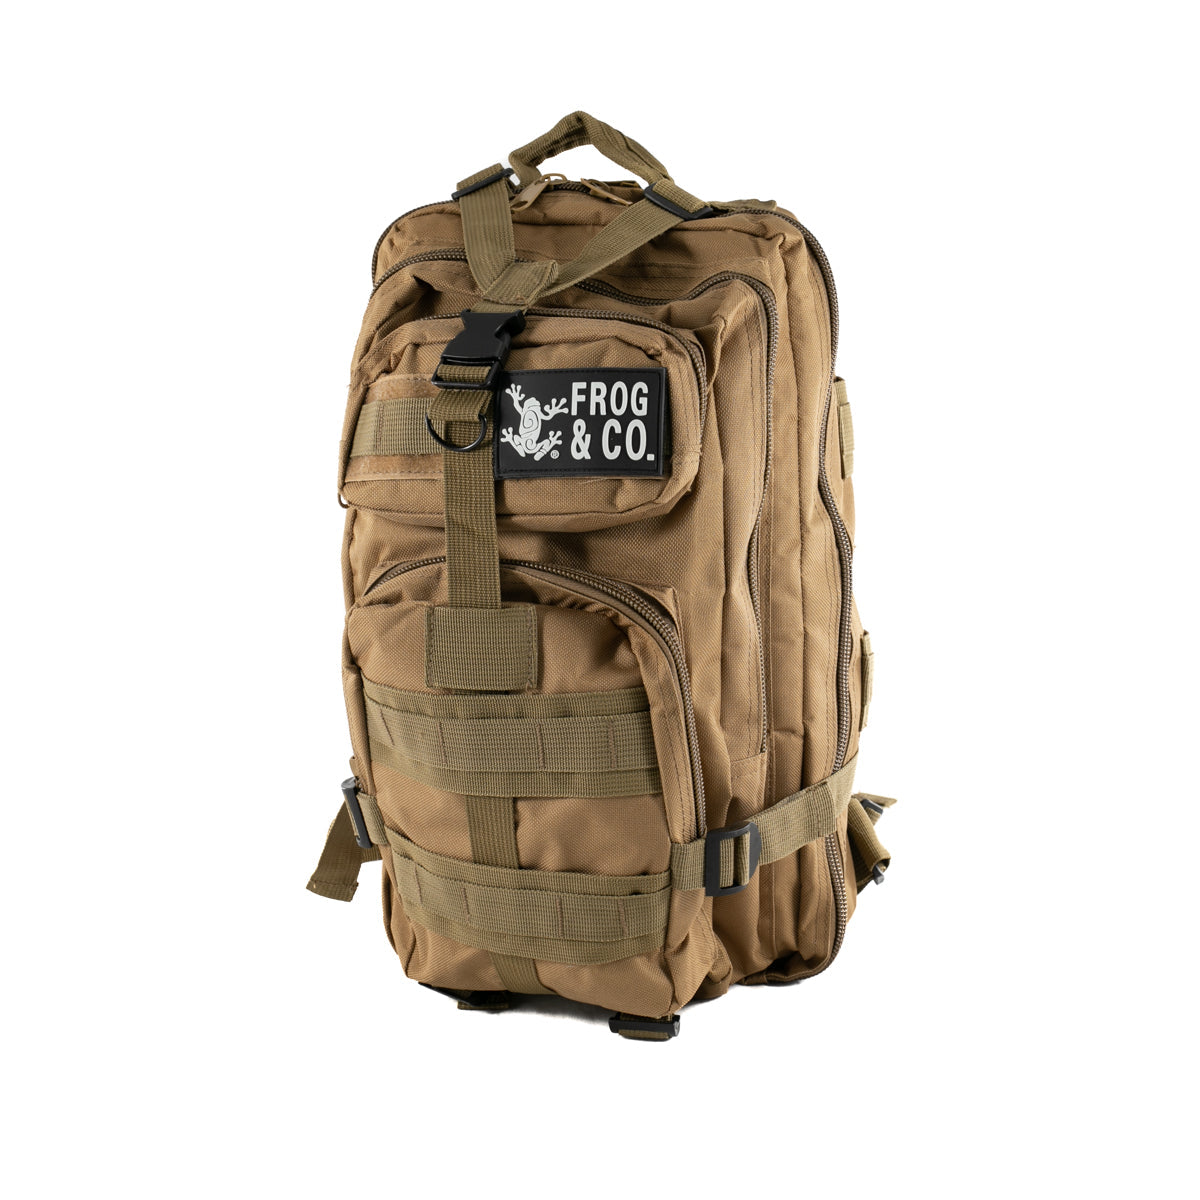 All-In-One Bug Out Bag